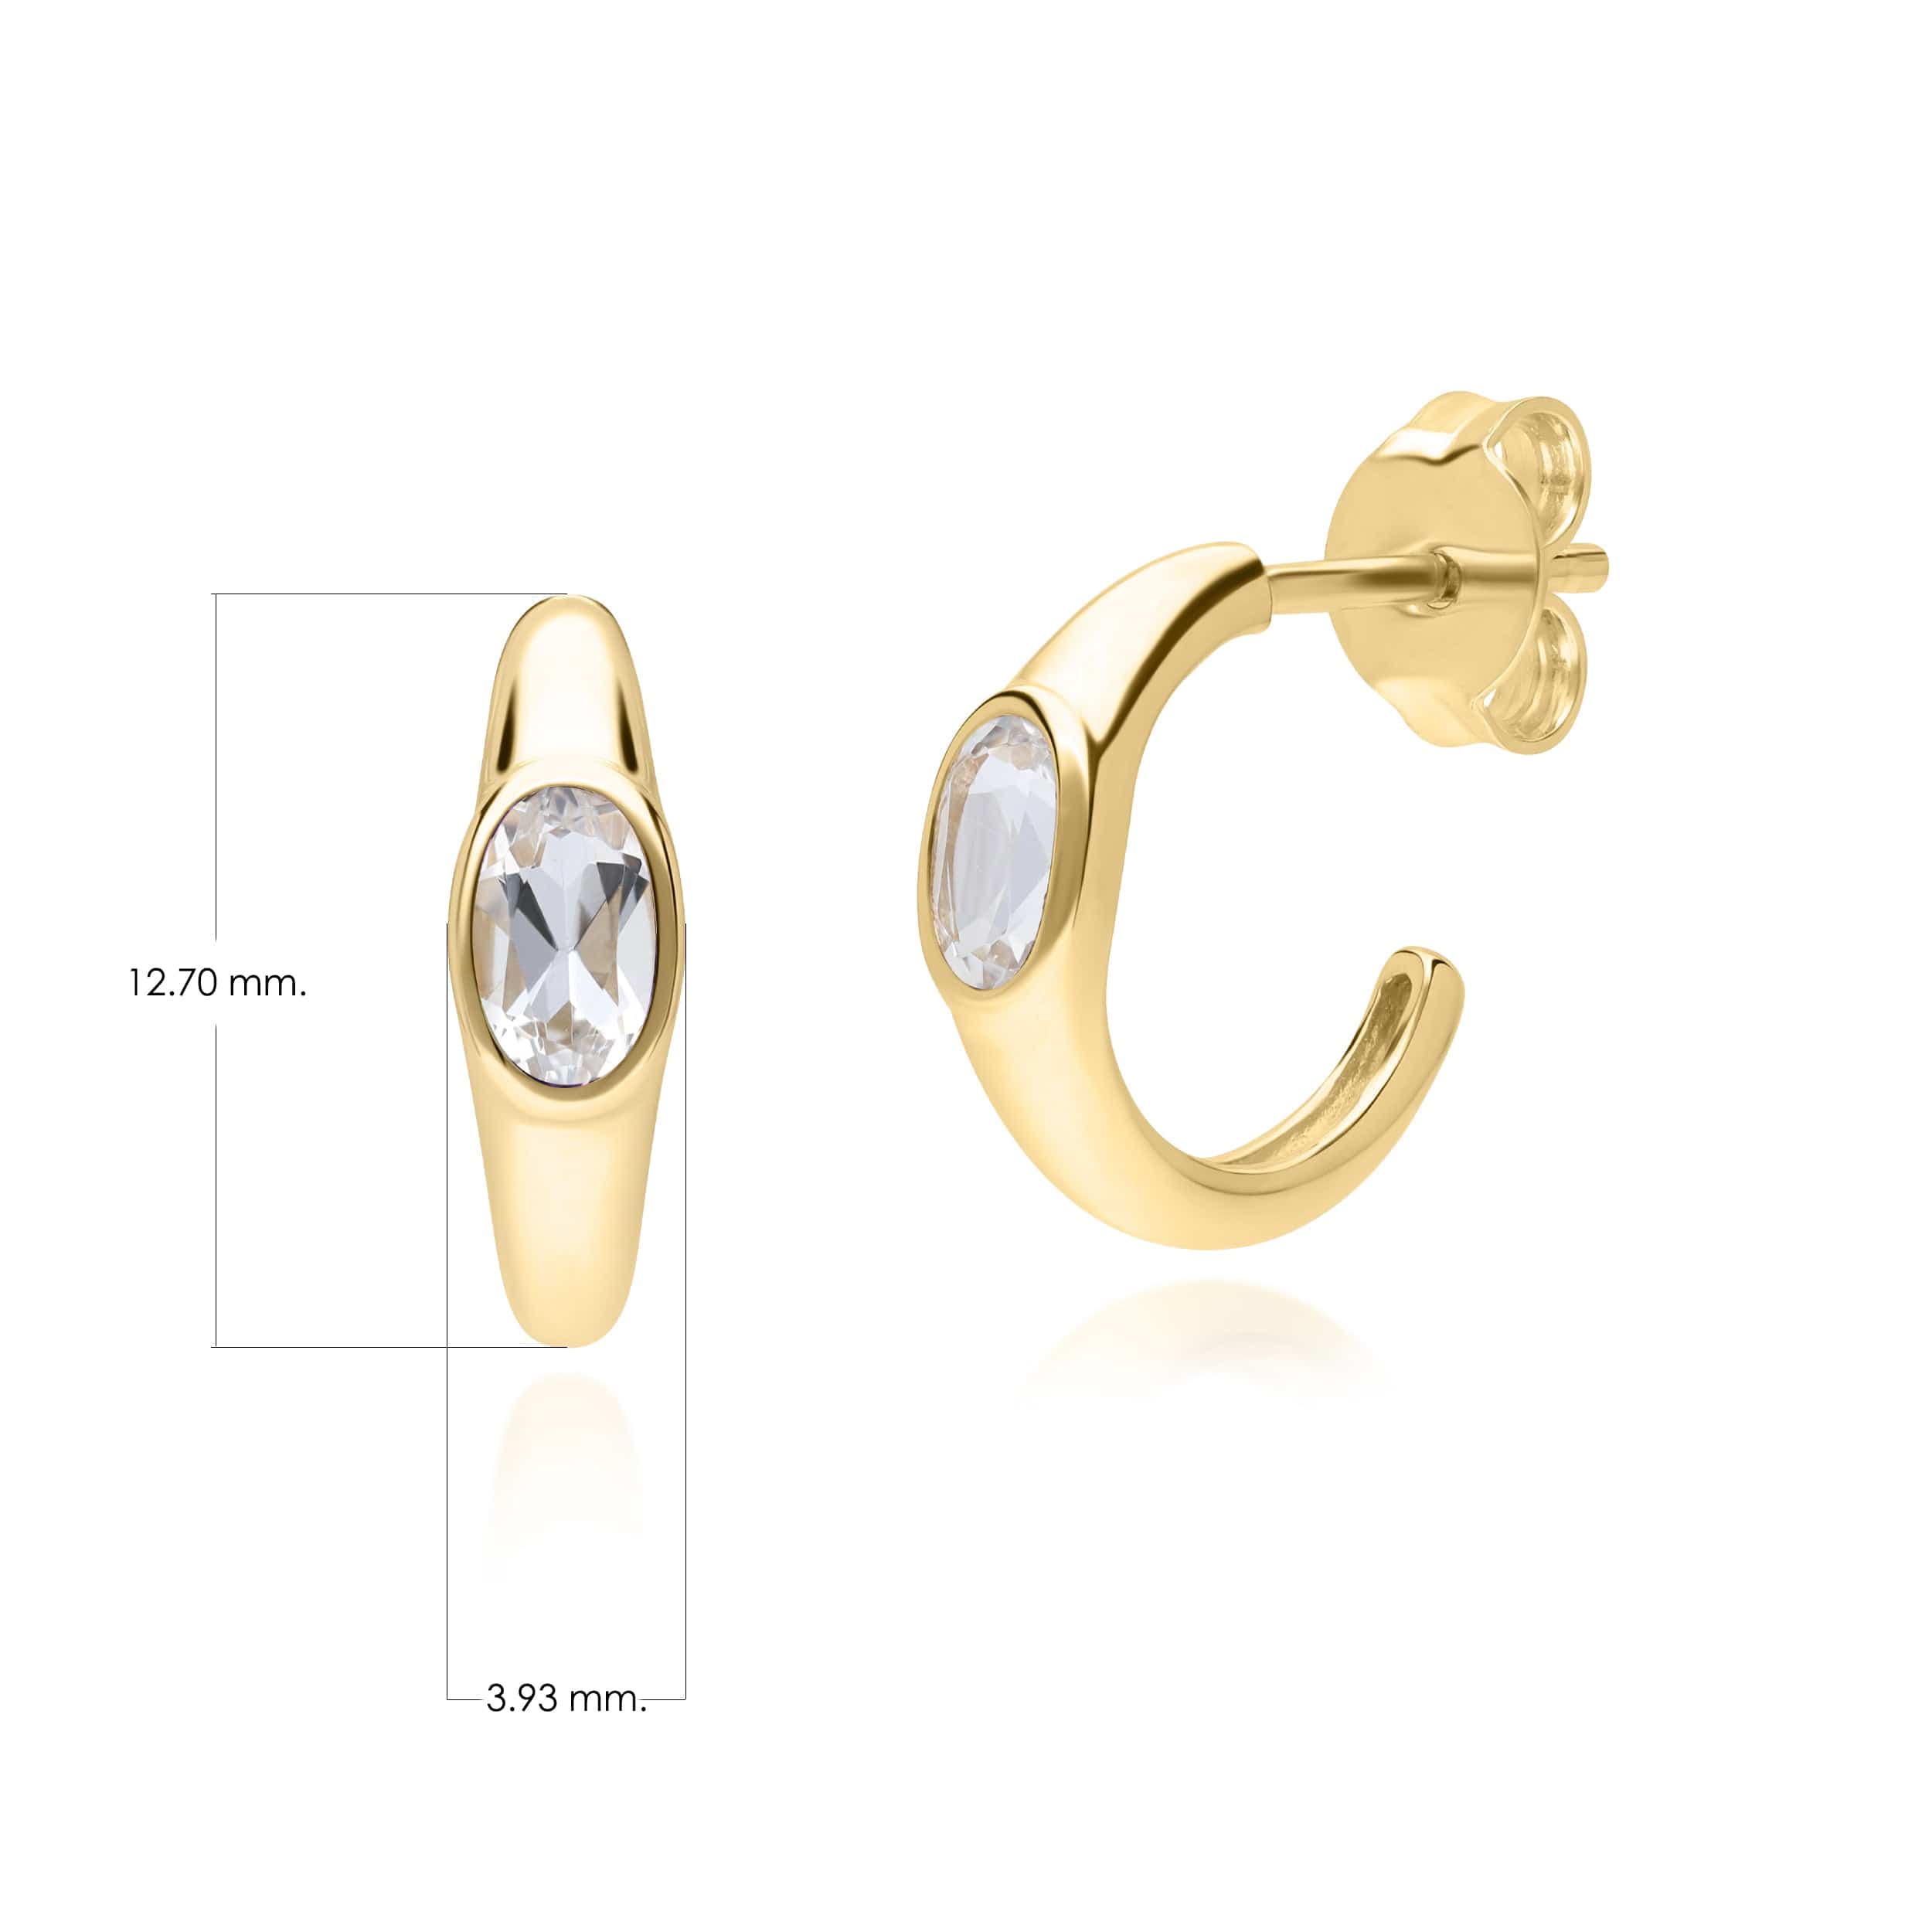 Modern Classic Oval White Topaz Stud Earrings in 18ct Gold Plated Silver